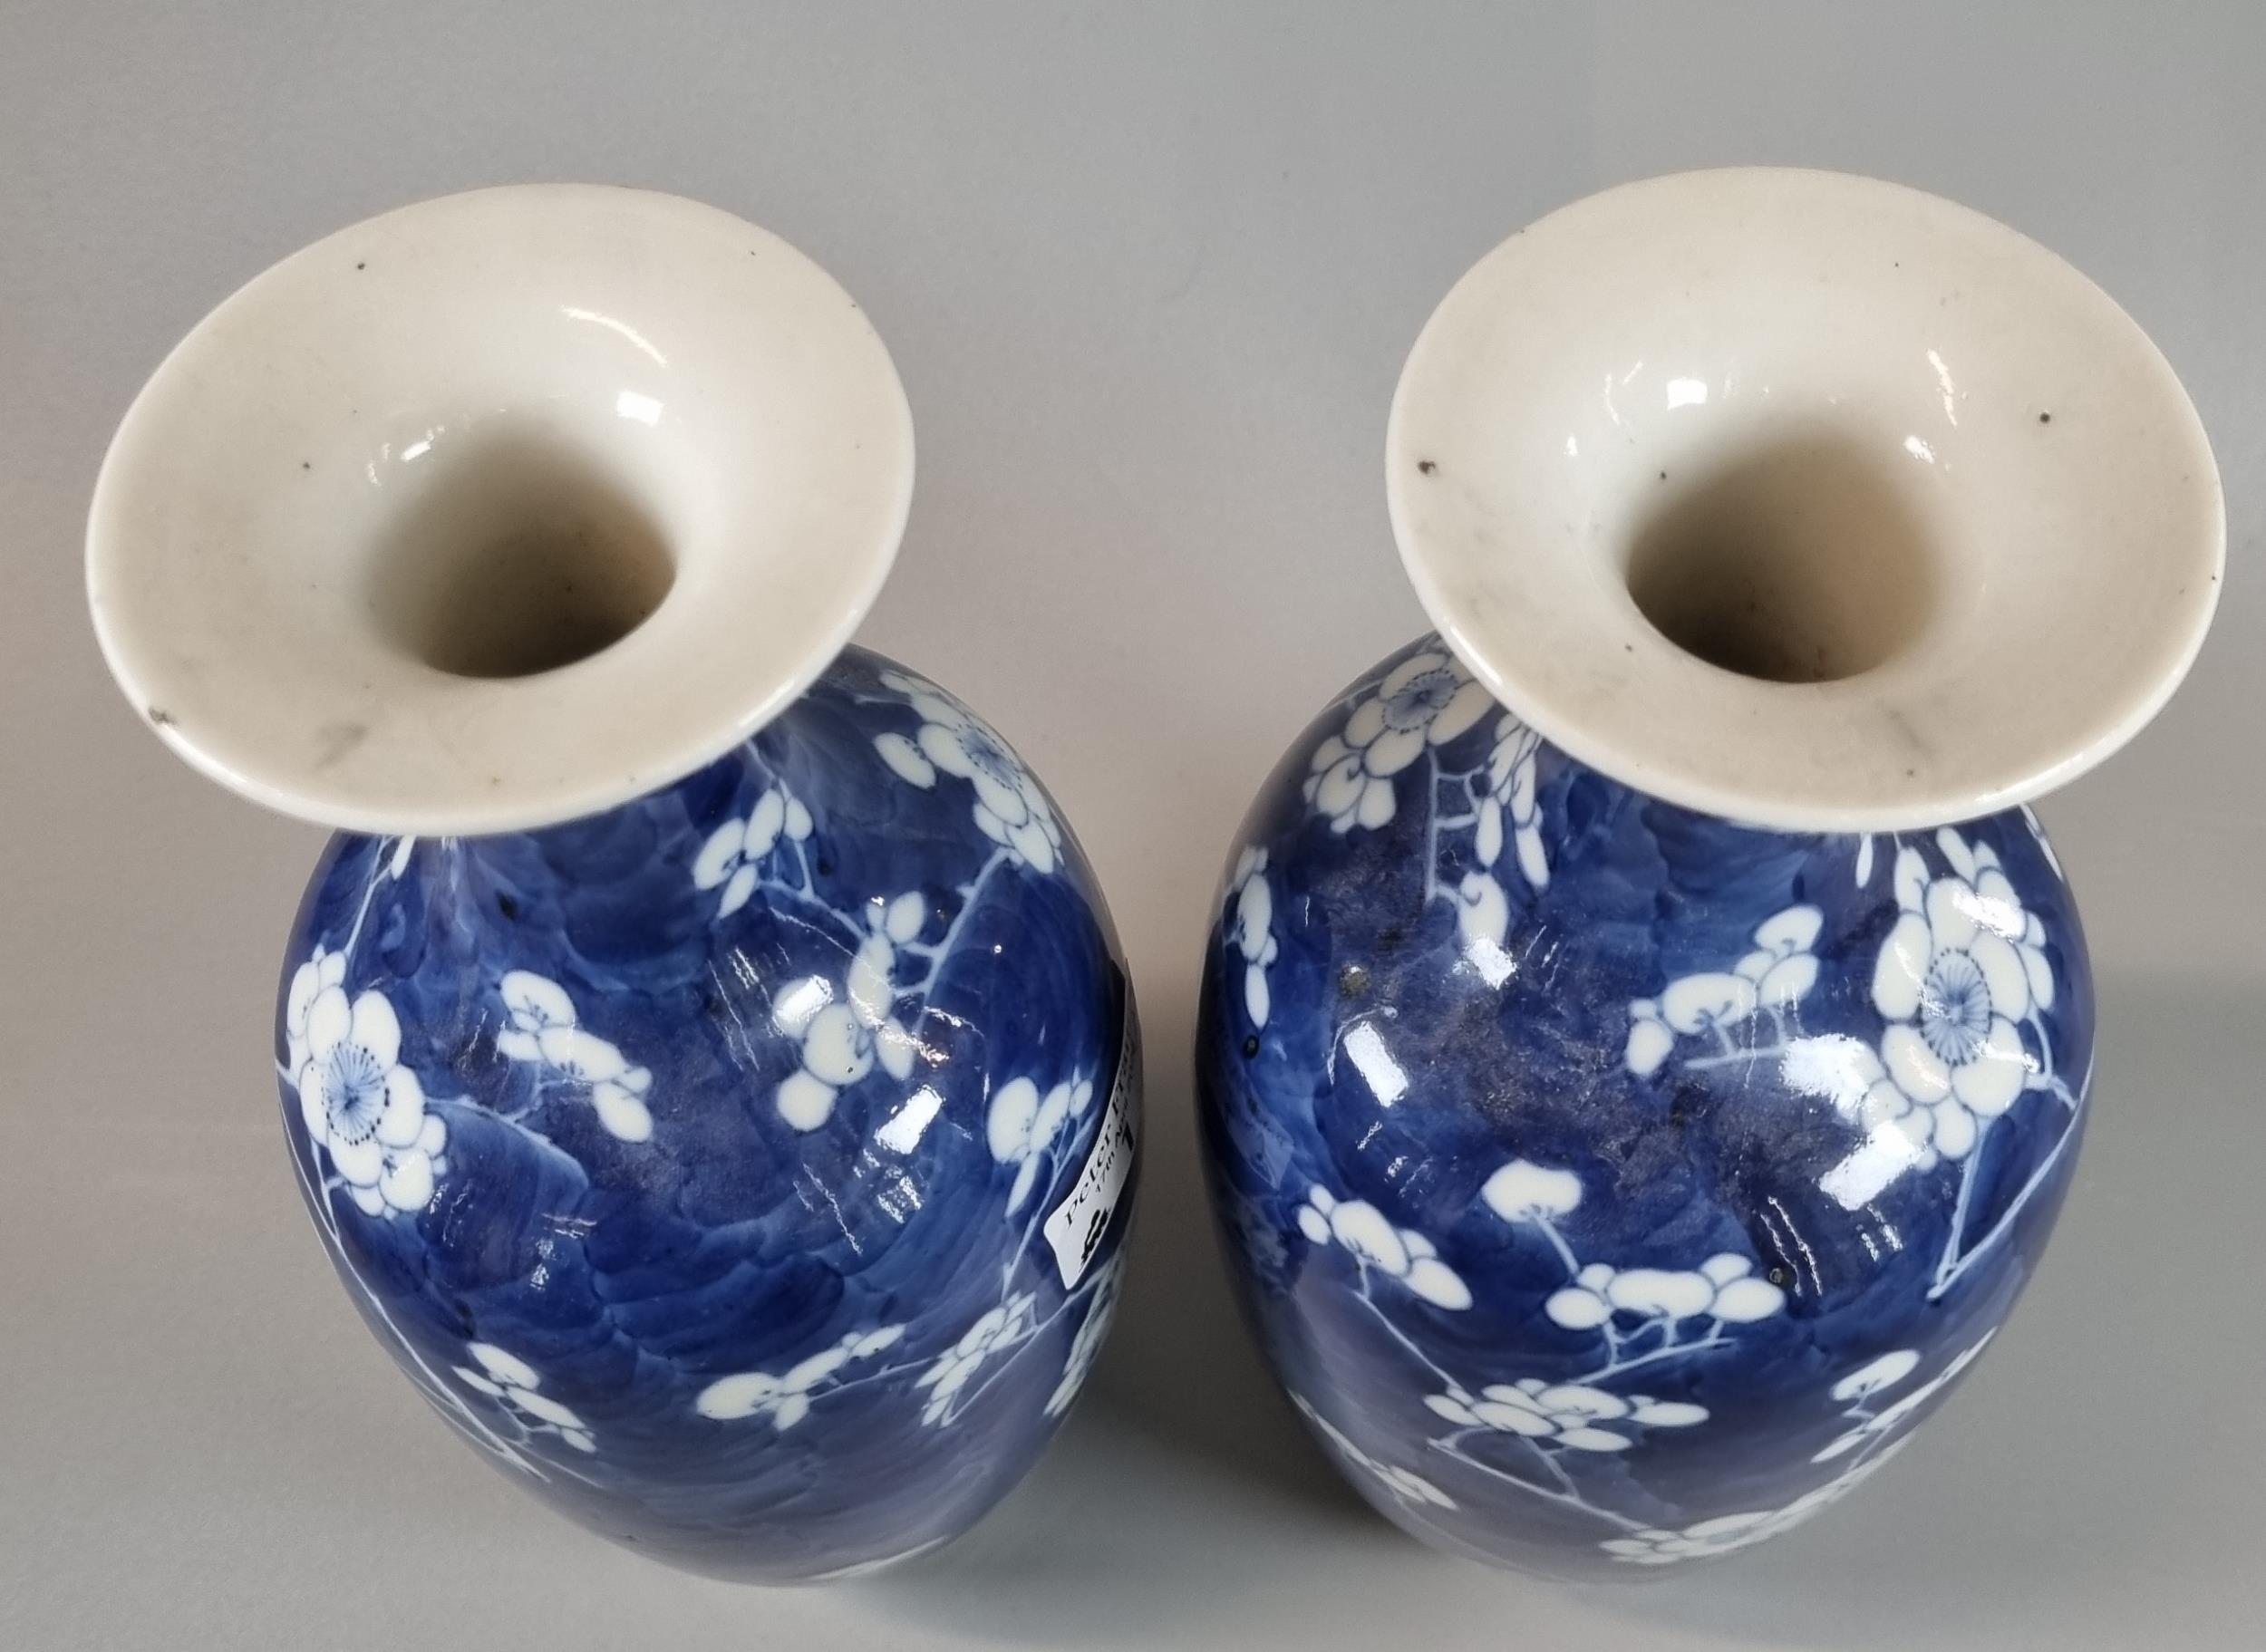 Pair of Chinese export porcelain blue and white baluster vases depicting flower and prunus - Image 3 of 8